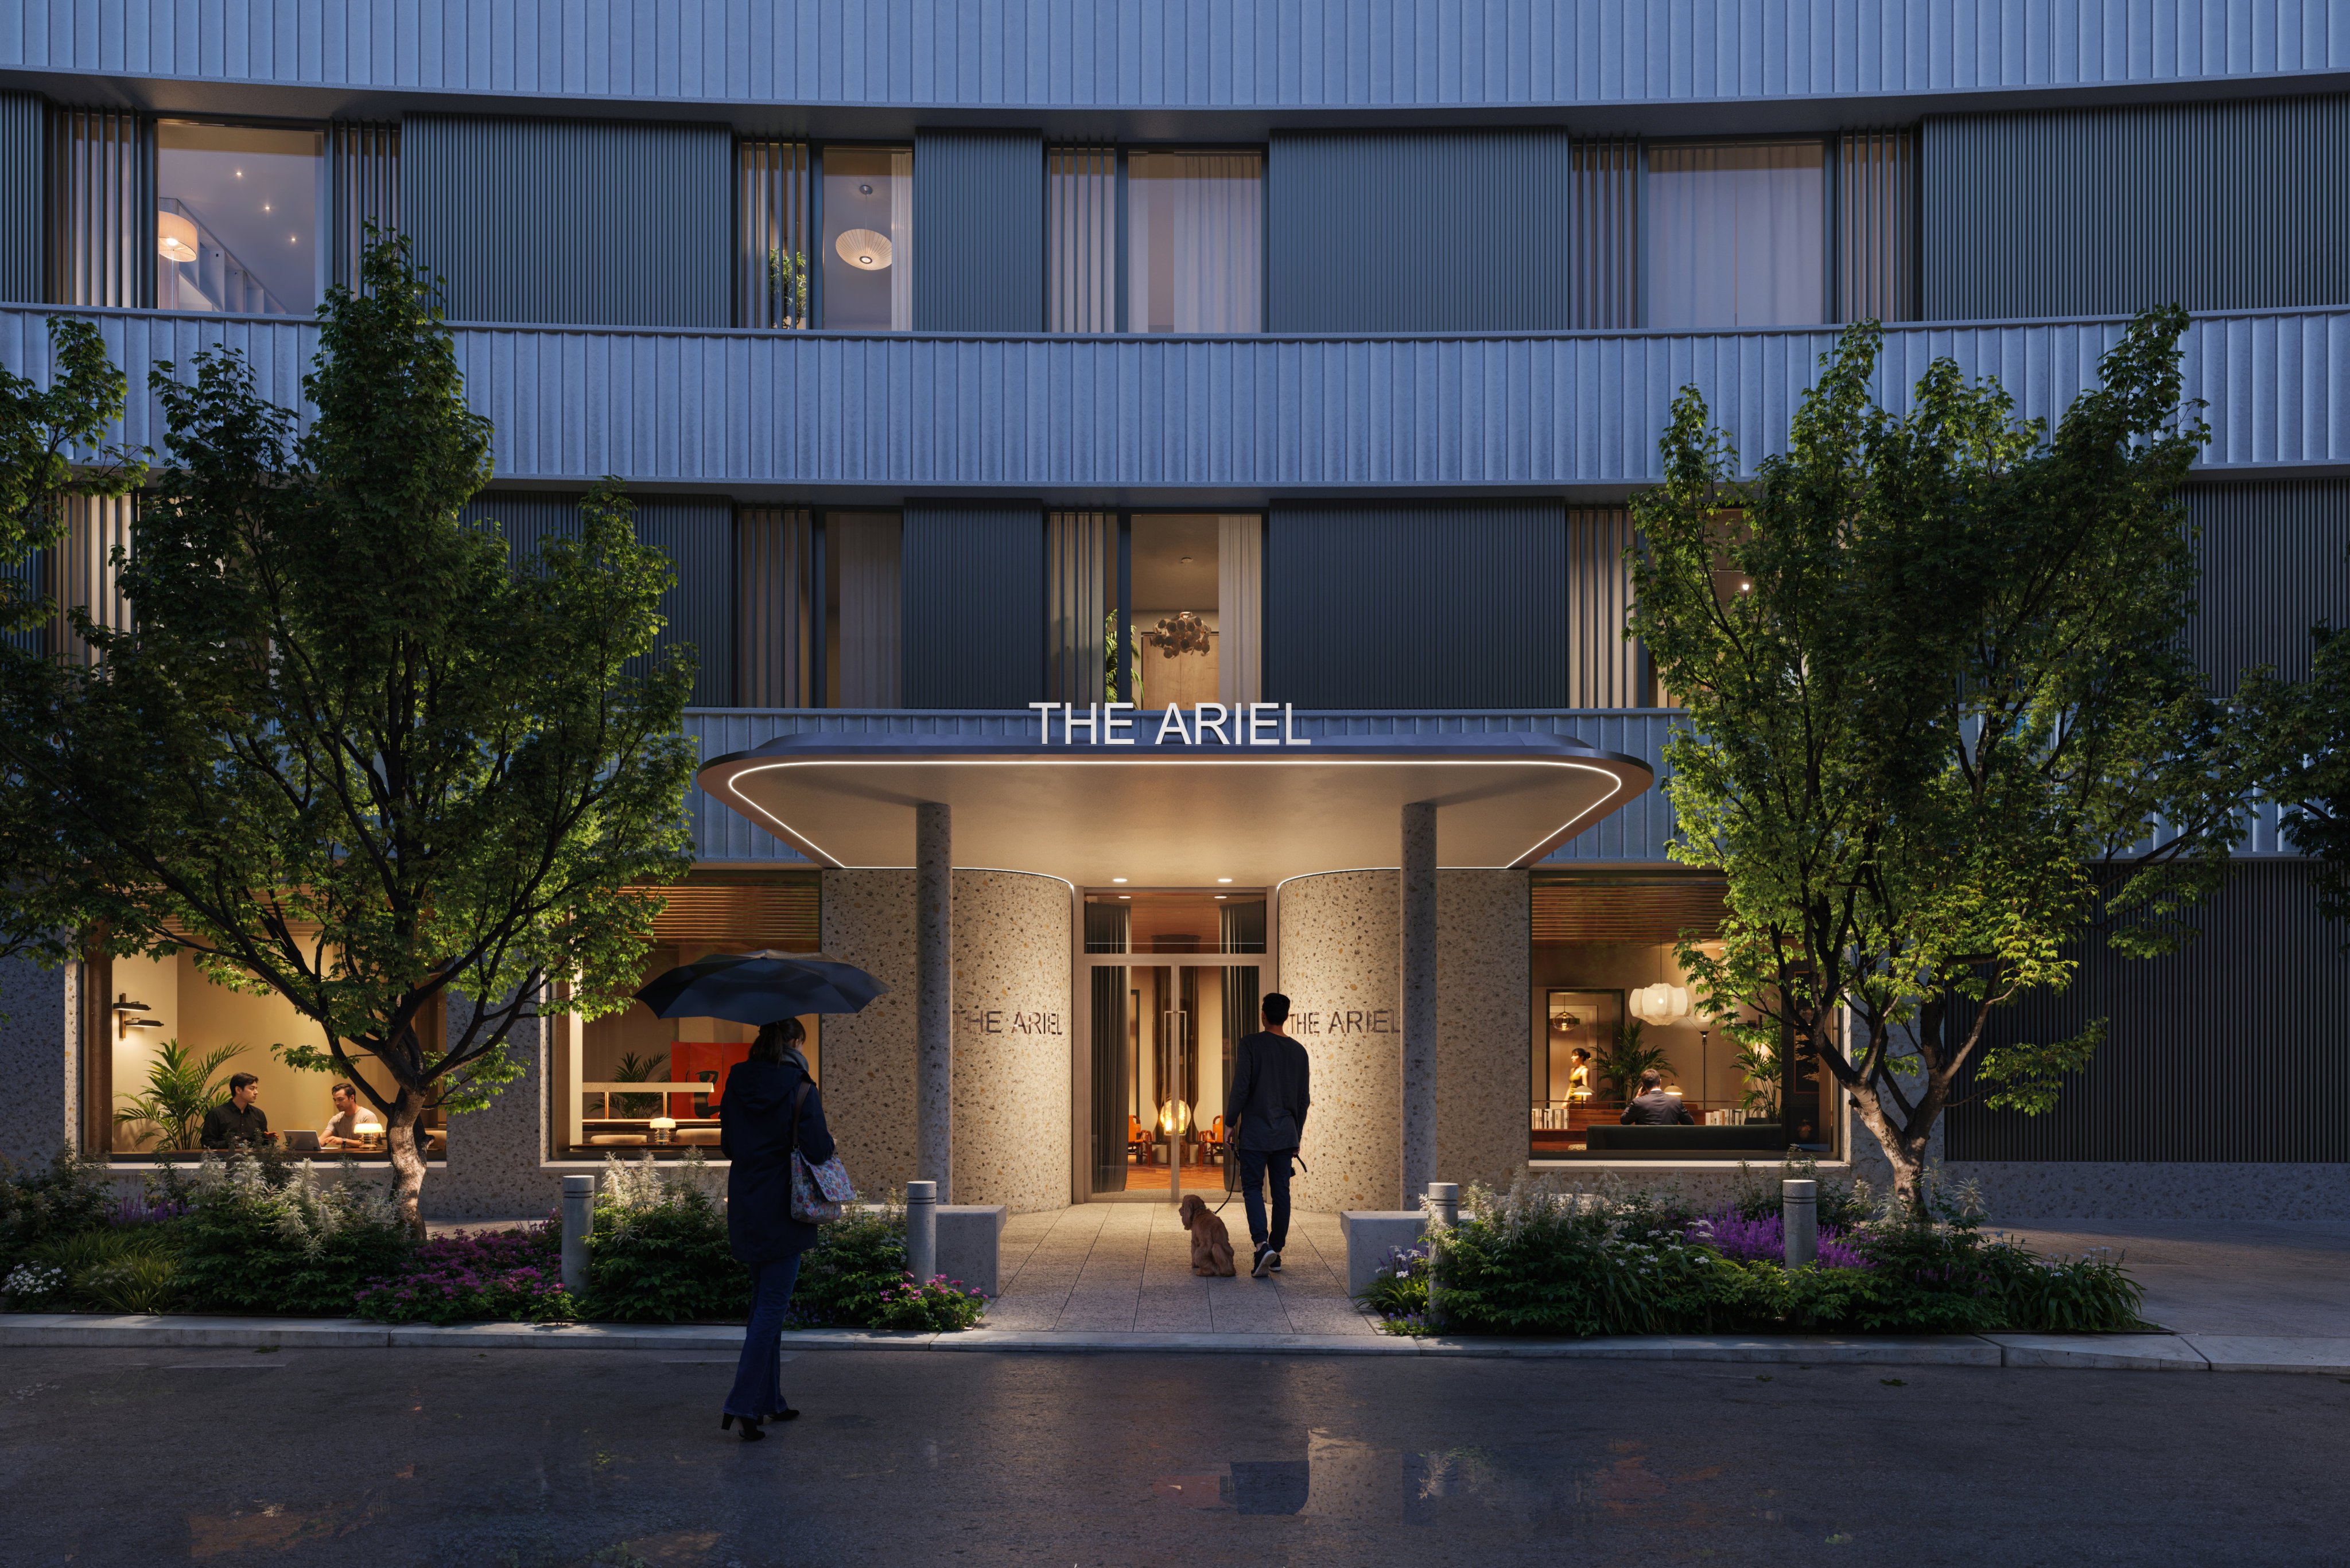 The Ariel, a 23-storey residential tower with 167 units comprising studios and flats with one-to-three bedrooms with an area of between 400 and 2,071 sq ft, in Television Centre in White City, London, is being marketed with prices starting at £590,000 (US$762,000). HANDOUT PHOTO